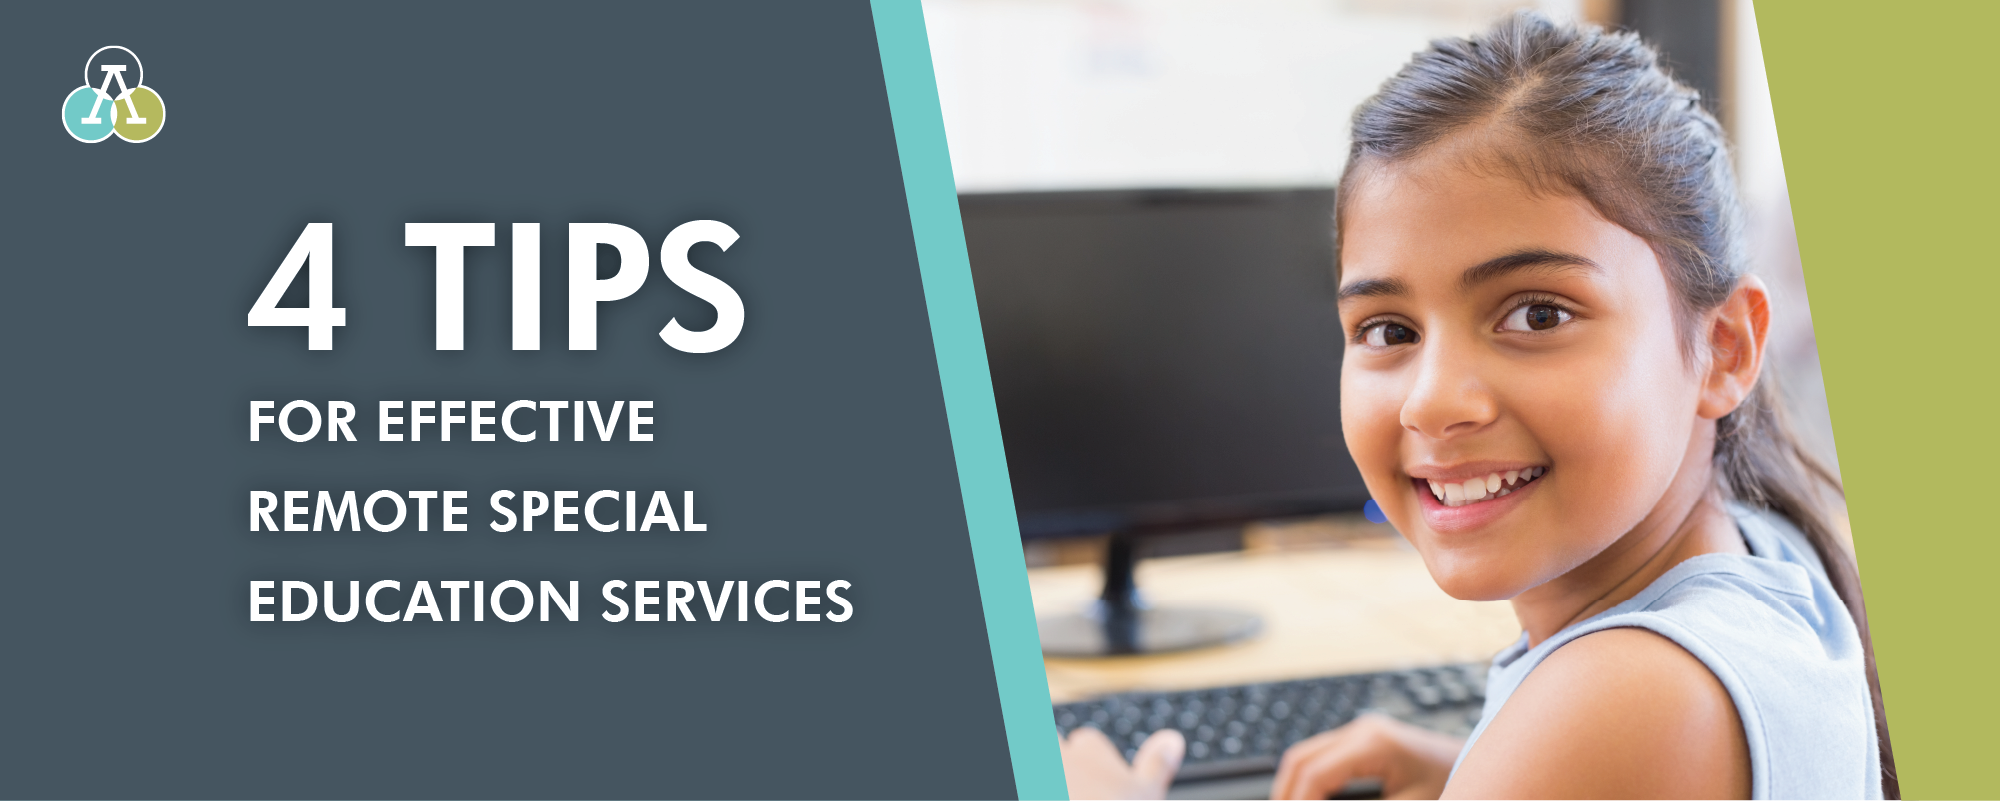 4 Tips for Effective Remote Special Education Services